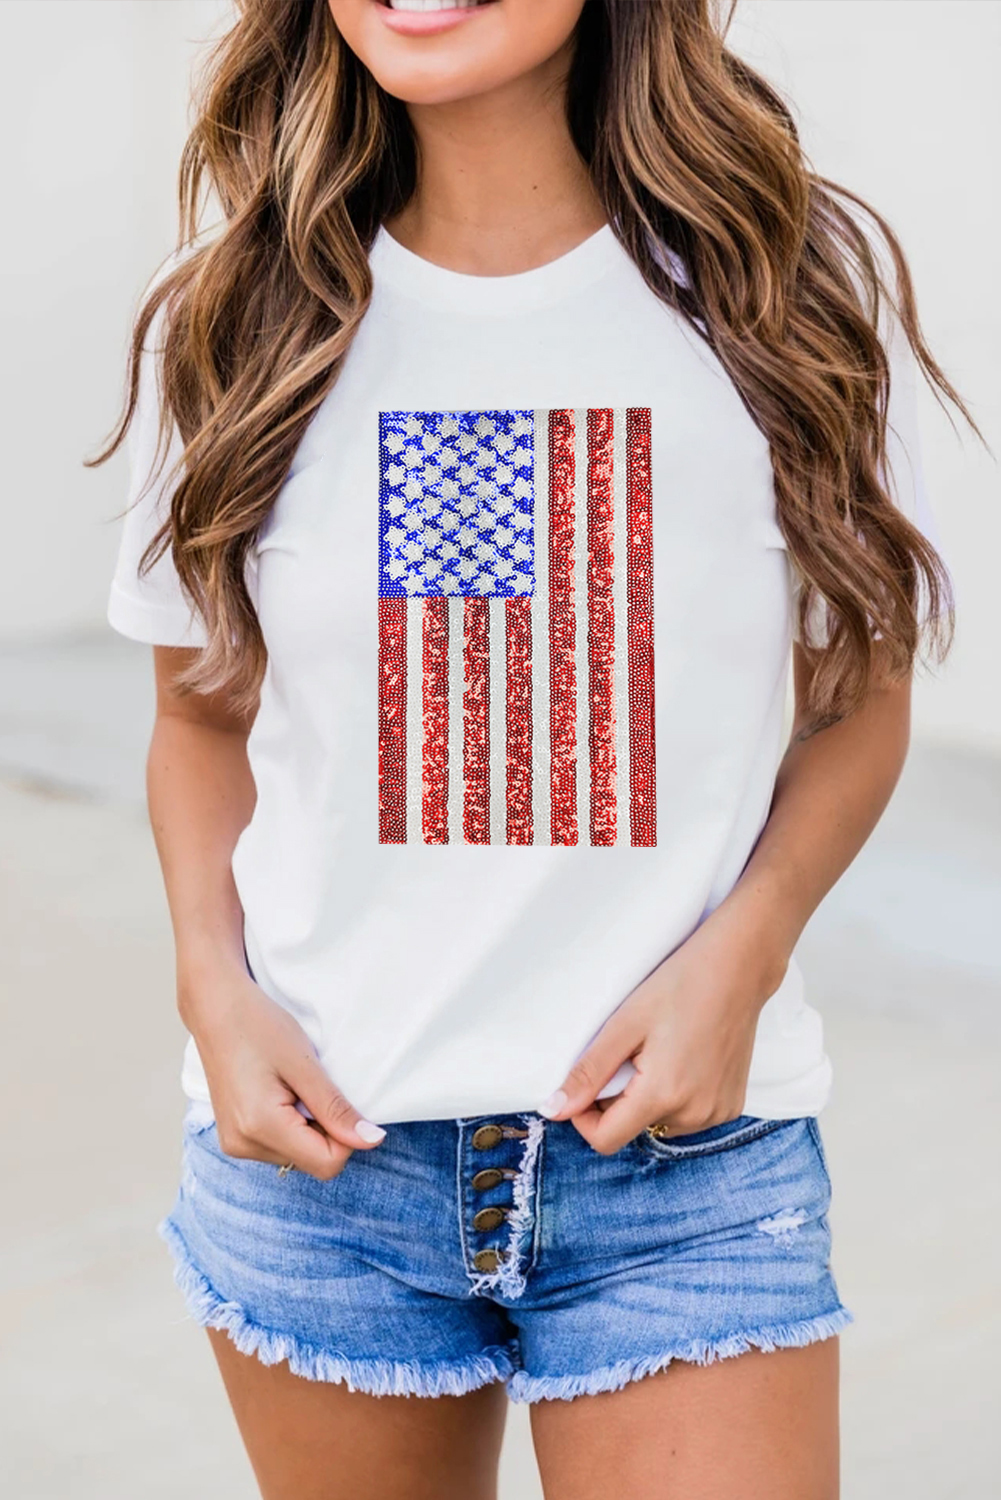 Shewin Wholesale High Quality White Shimmery USA FLAG Graphic Round Neck Tee